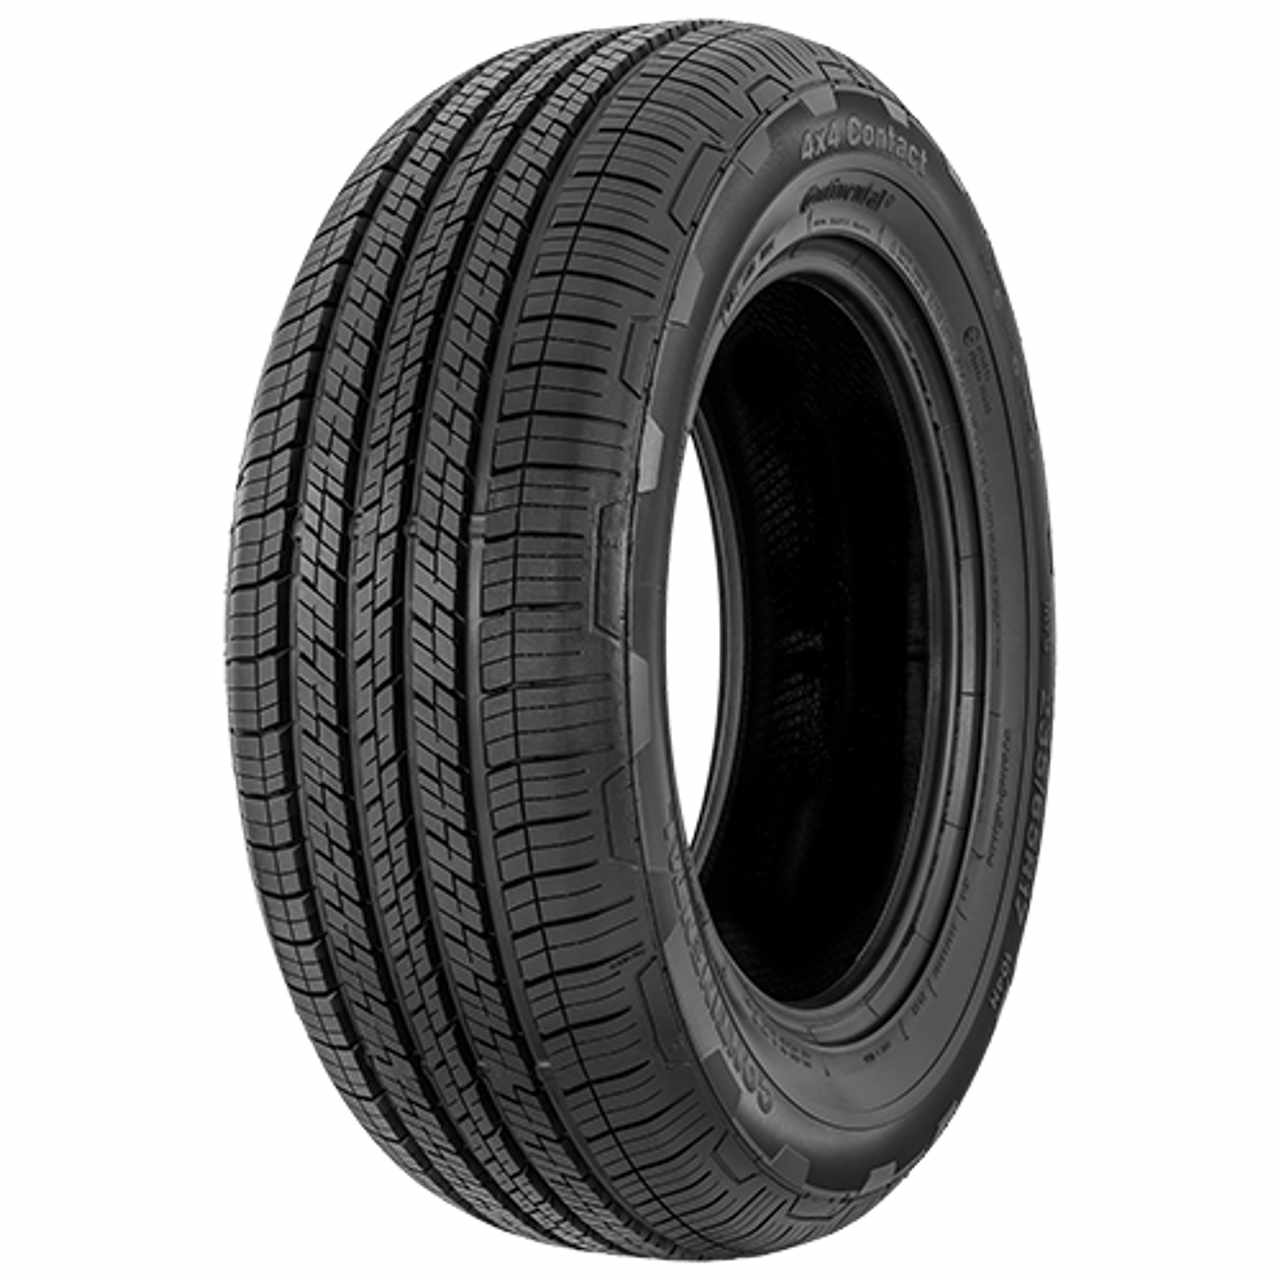 CONTINENTAL CONTI4X4CONTACT 255/55R19 111V BSW XL